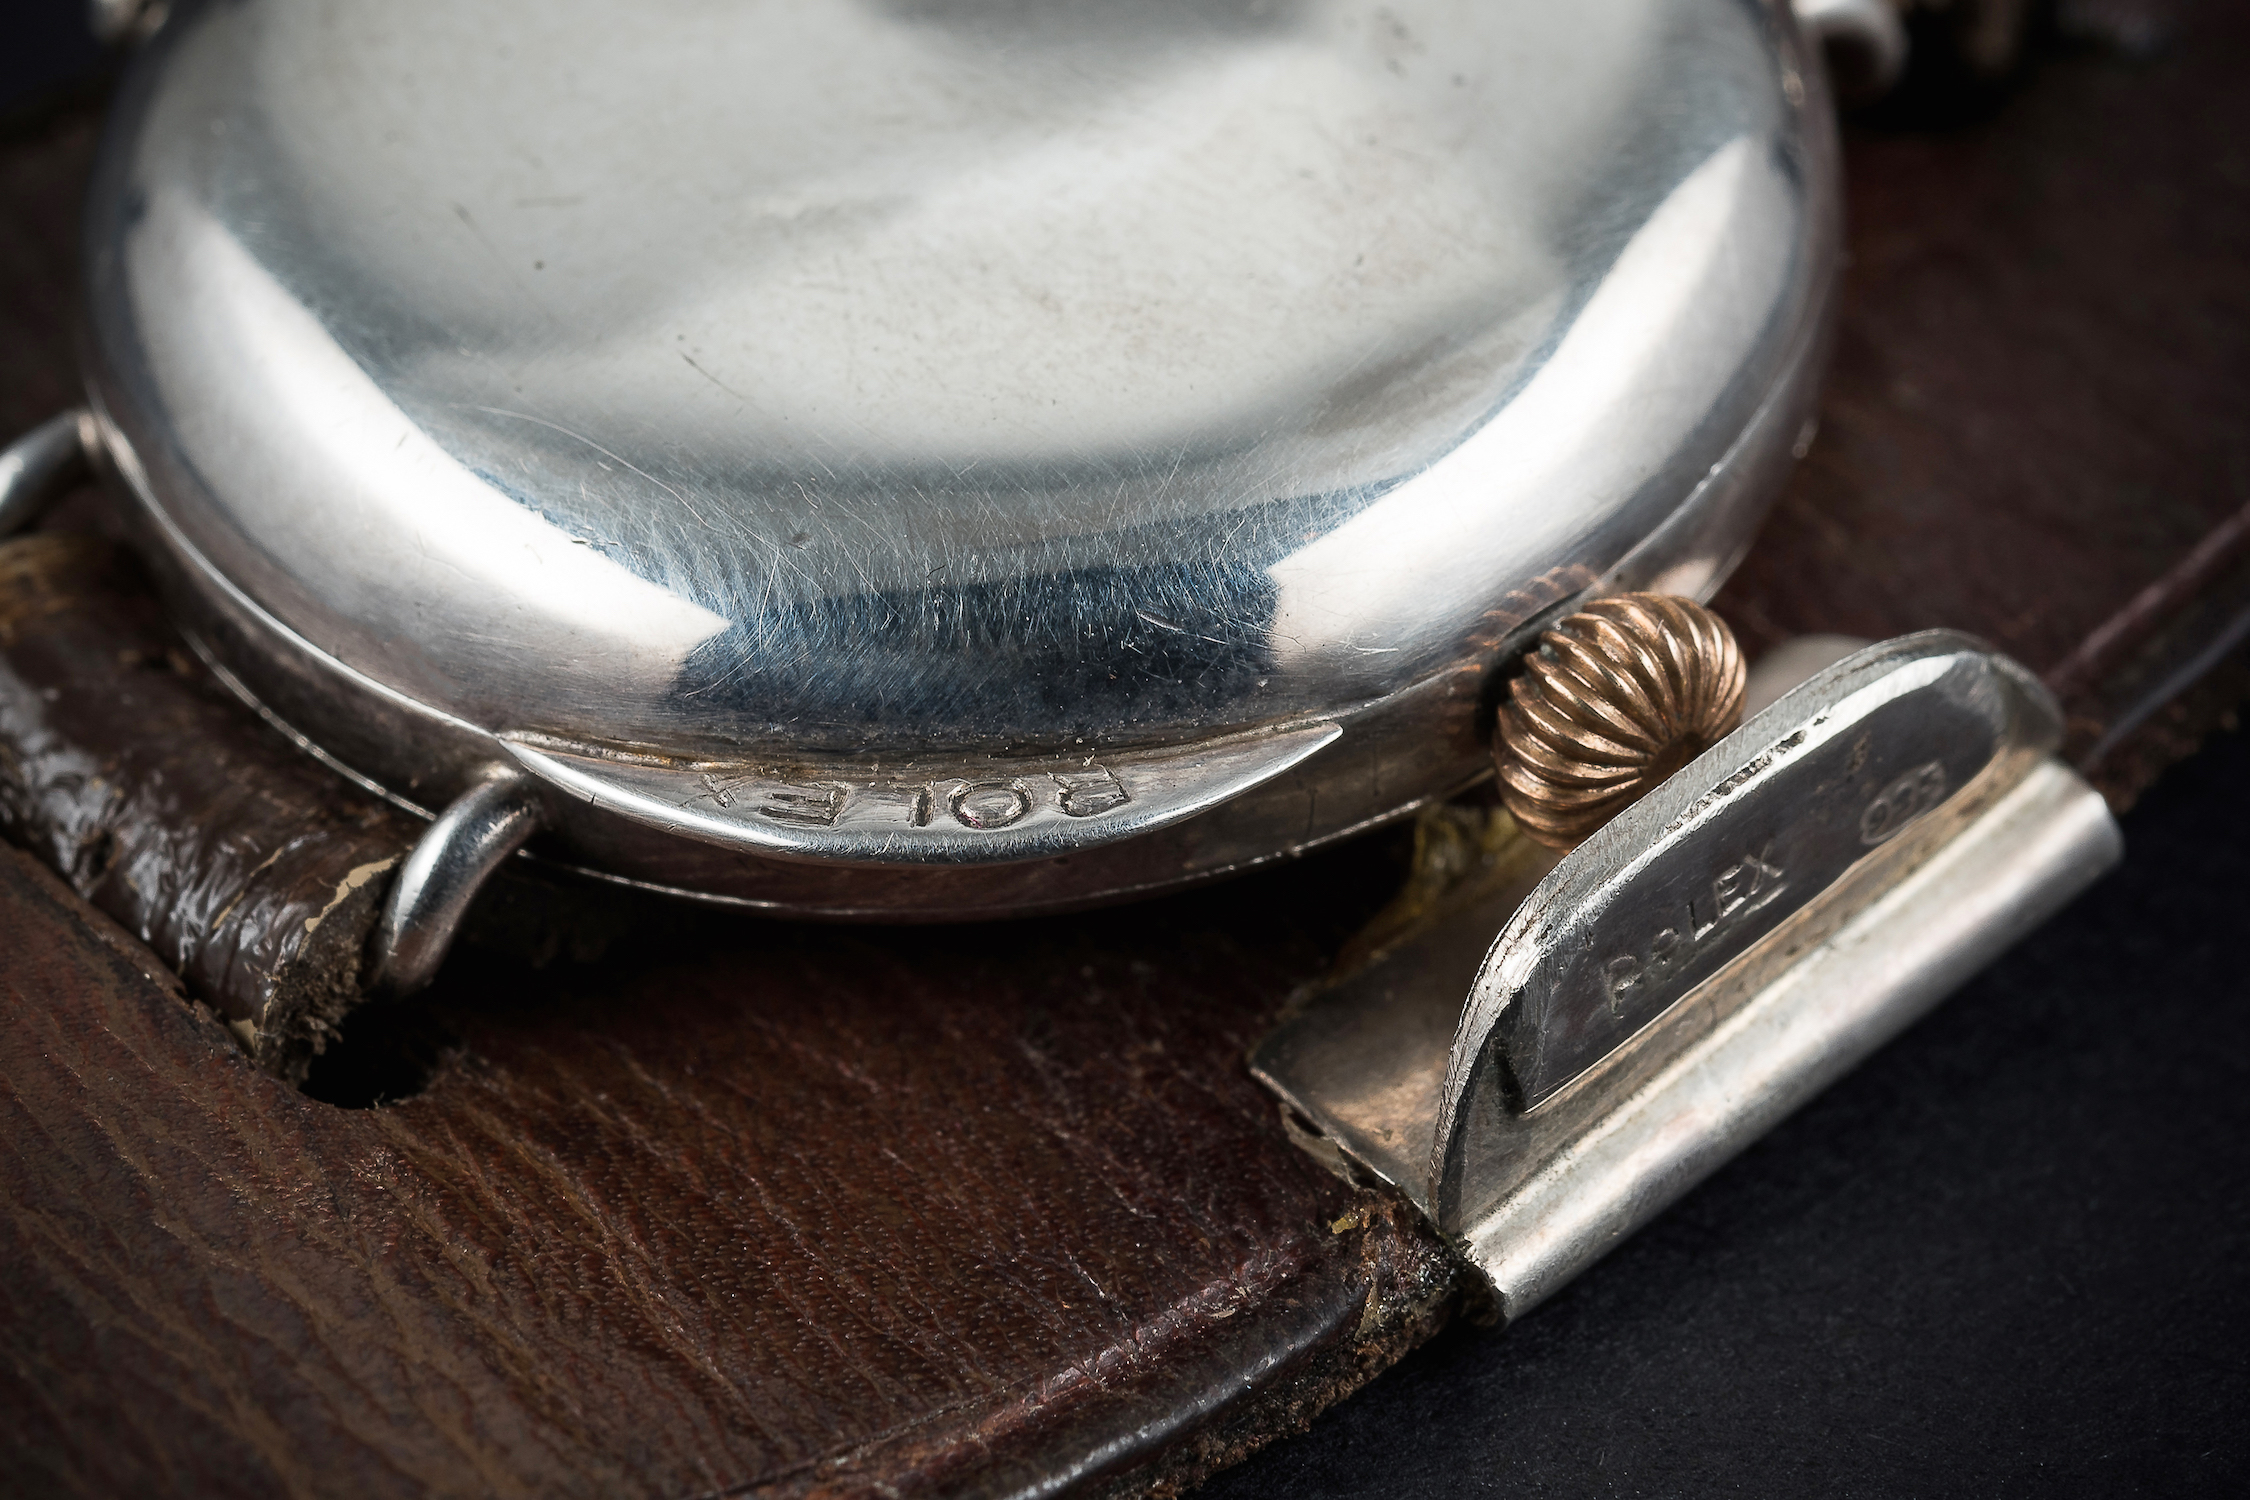 AN EXTREMELY RARE GENTLEMAN'S SOLID SILVER ROLEX FULL HUNTER WWI "OFFICERS" WRIST WATCH CIRCA - Image 2 of 3